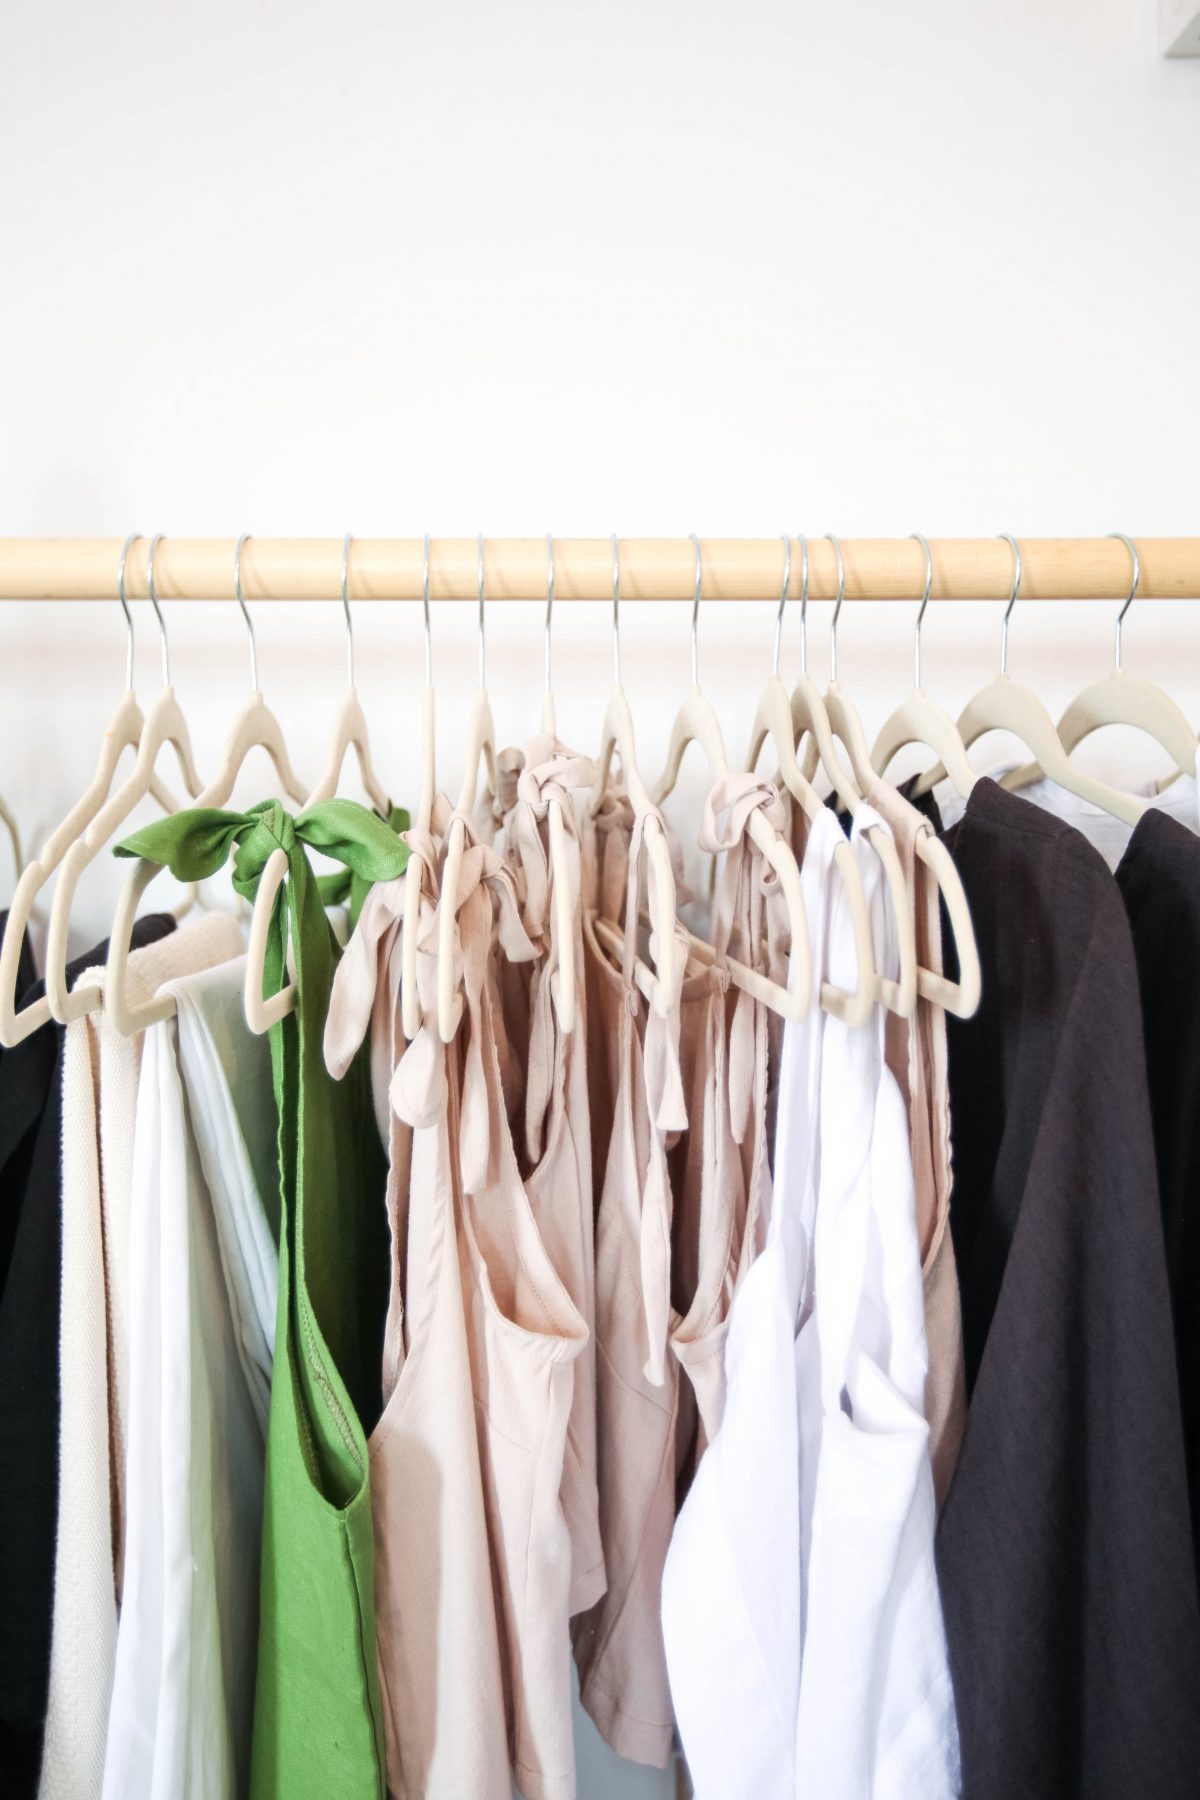 10 Practical Tips for Extending the Lifespan of Your Clothes